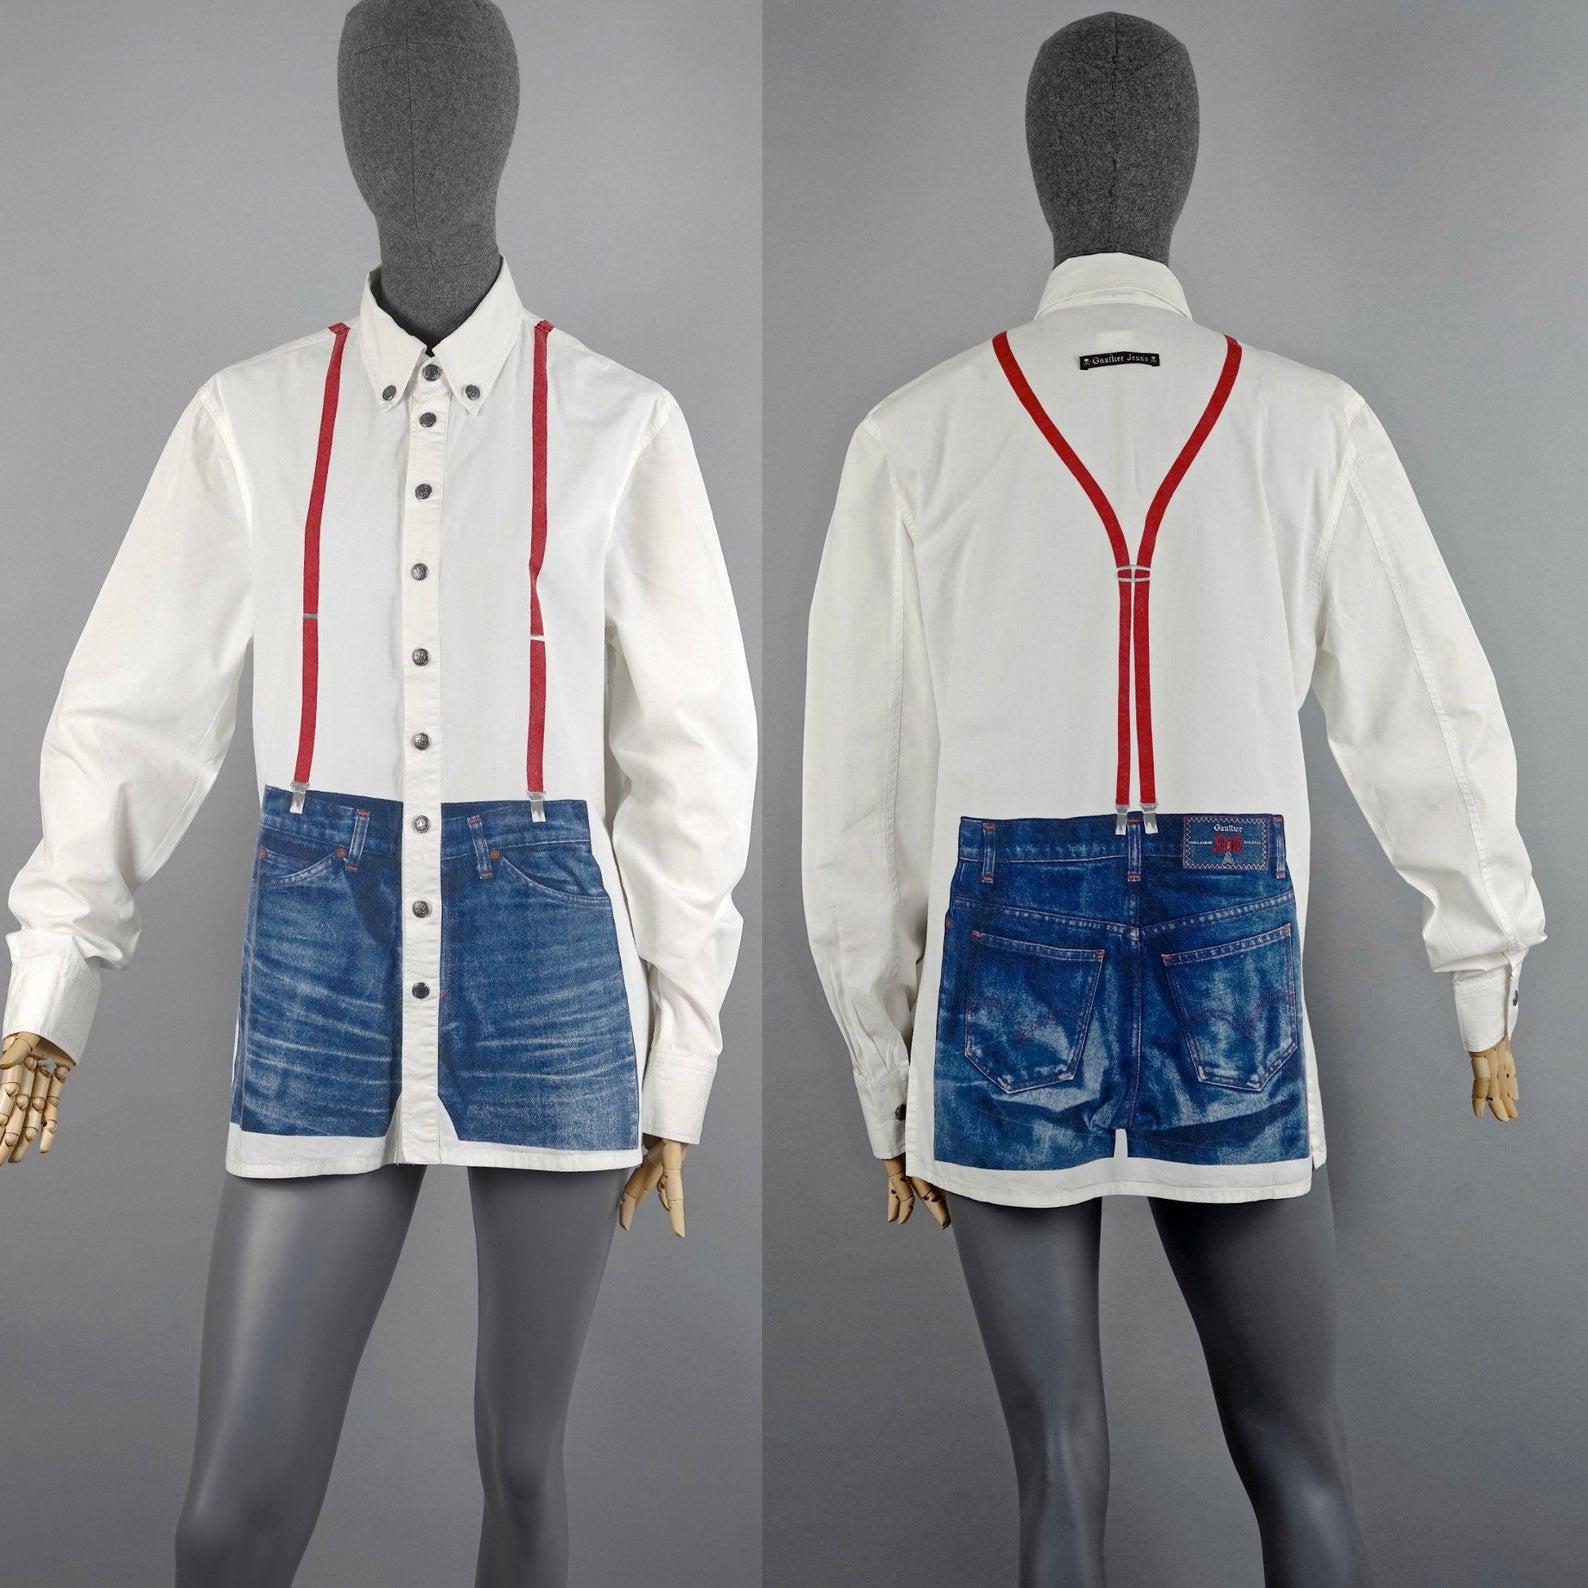 Vintage JEAN PAUL GAULTIER Trompe L'oeil Illusion Denim Suspender Long Sleeves Shirt Top

Measurements taken laid flat, please double waist and hips:
Shoulder: 16.92 inches (43 cm)
Sleeves: 25.39 inches (64.5 cm)
Bust: 20.86 inches (53 cm)
Waist: